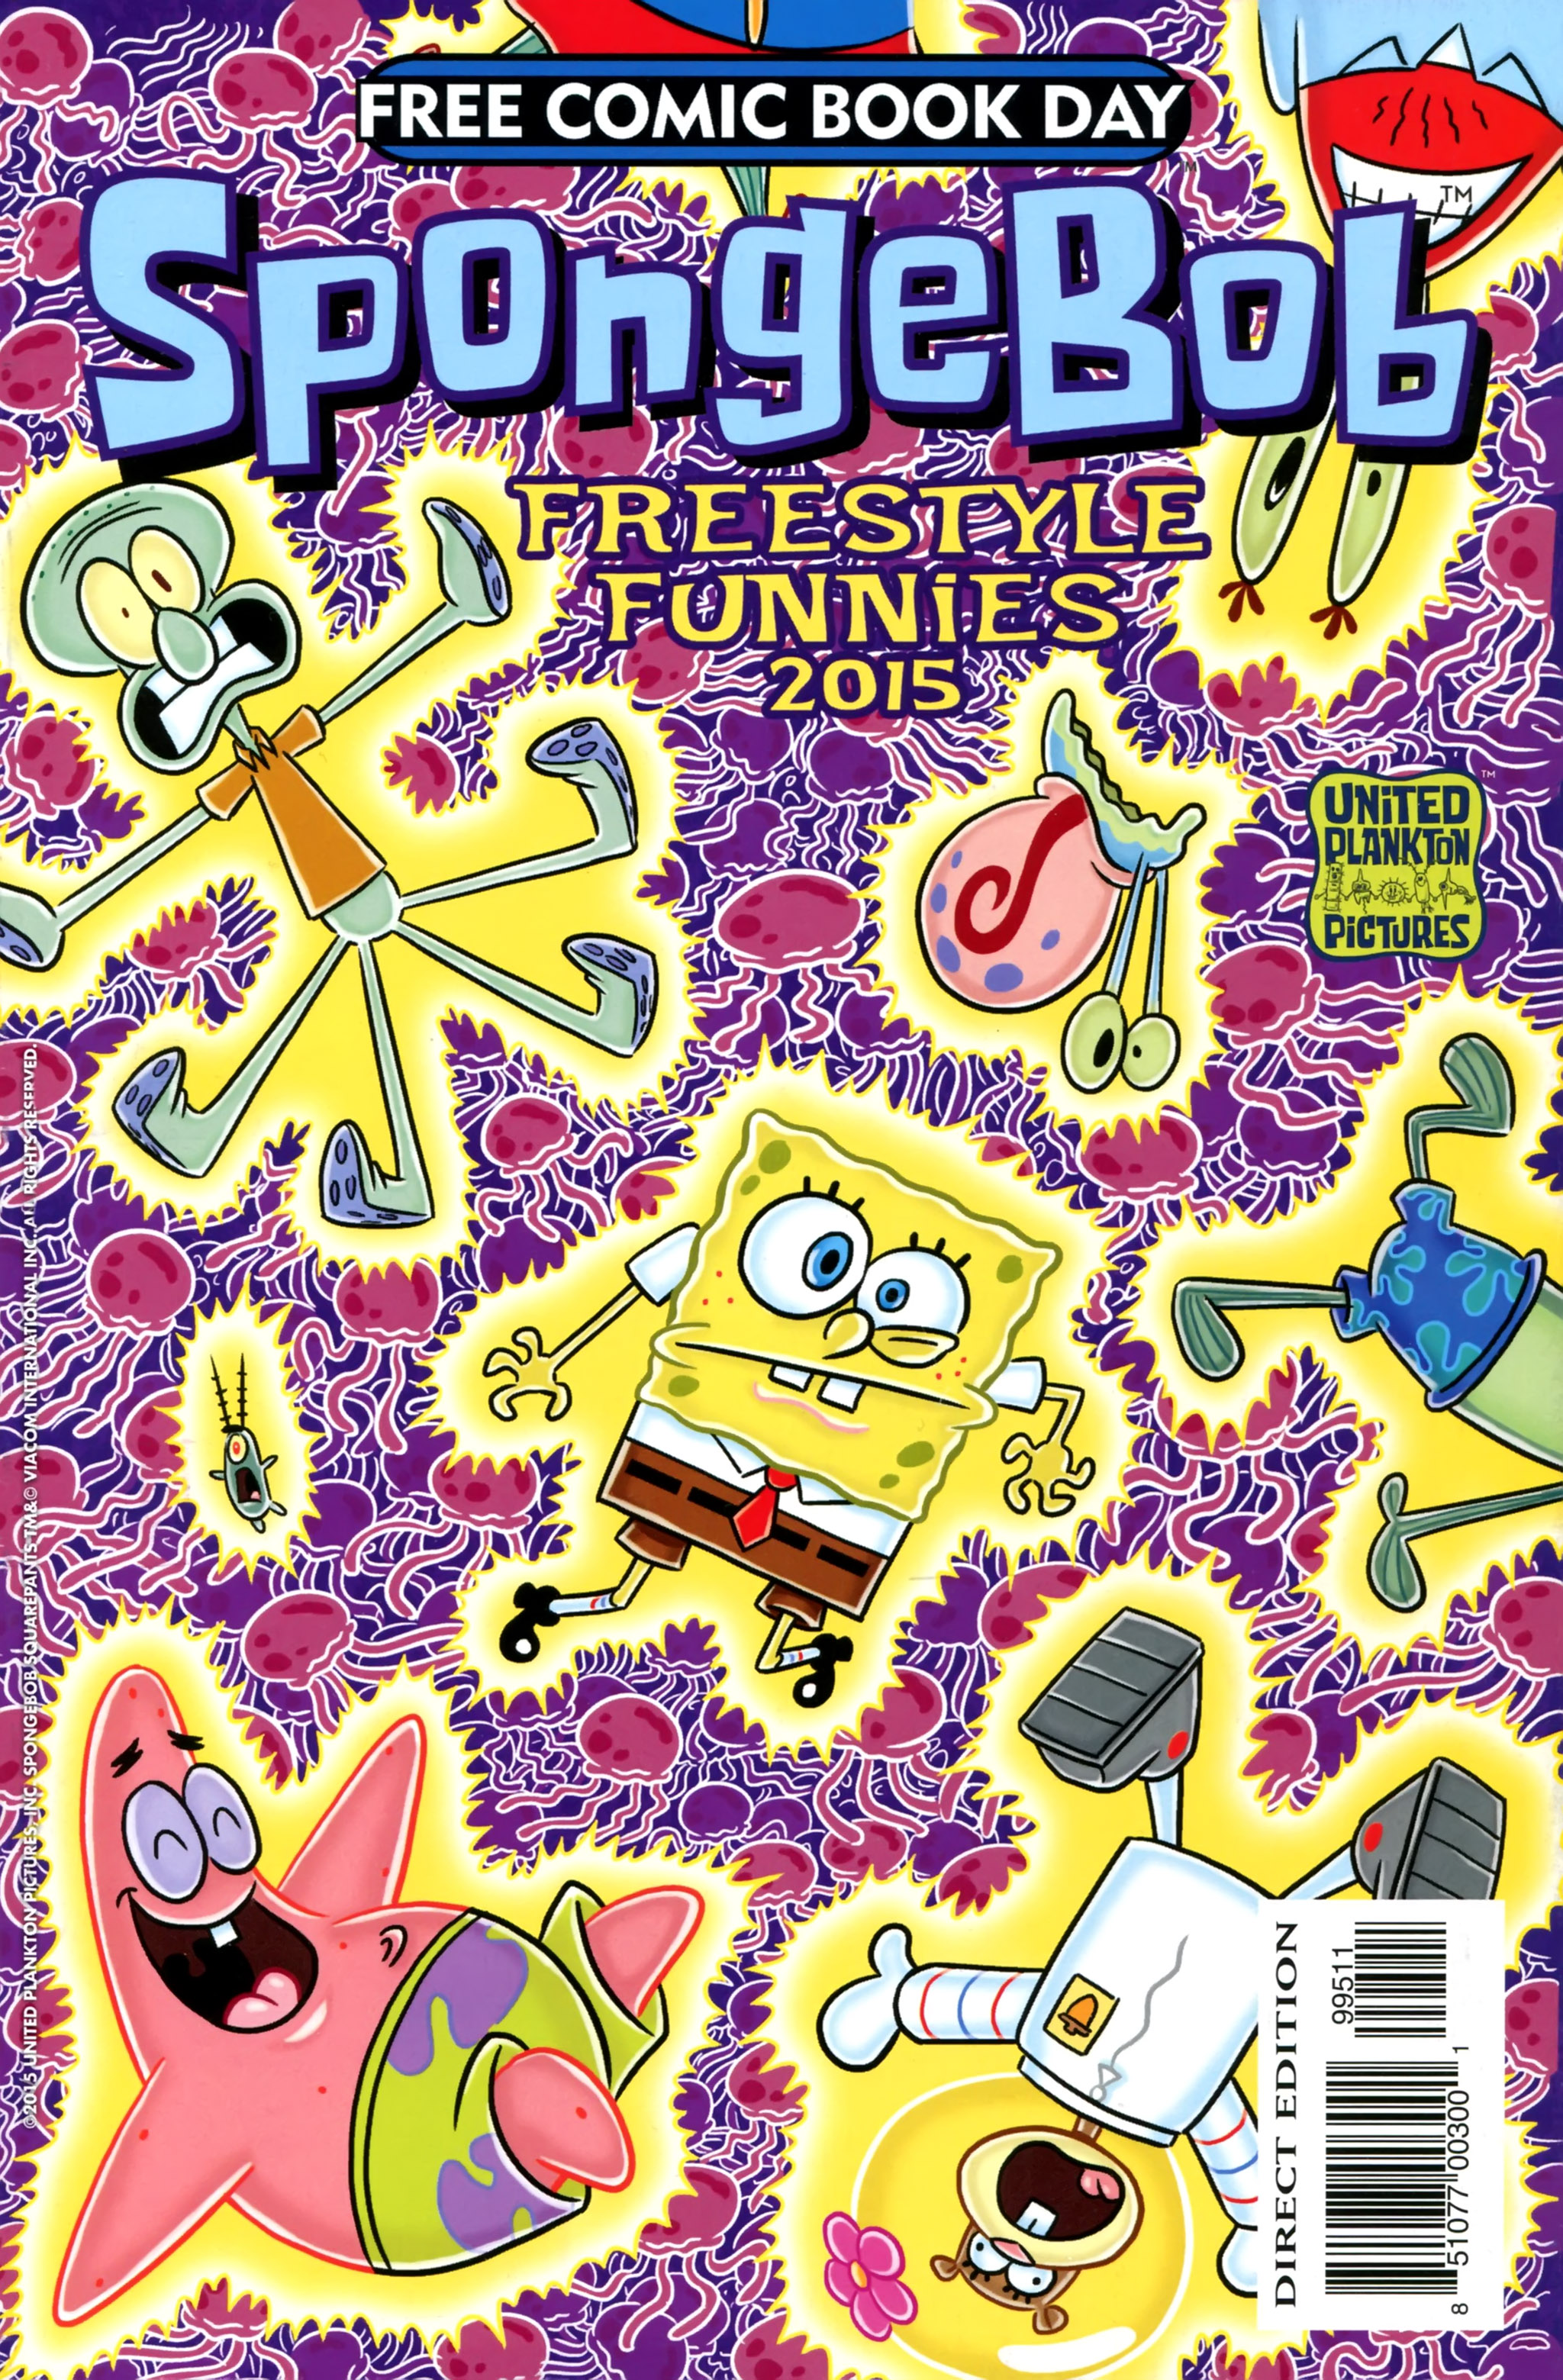 Free Comic Book Day 2015: Freestyle Funnies